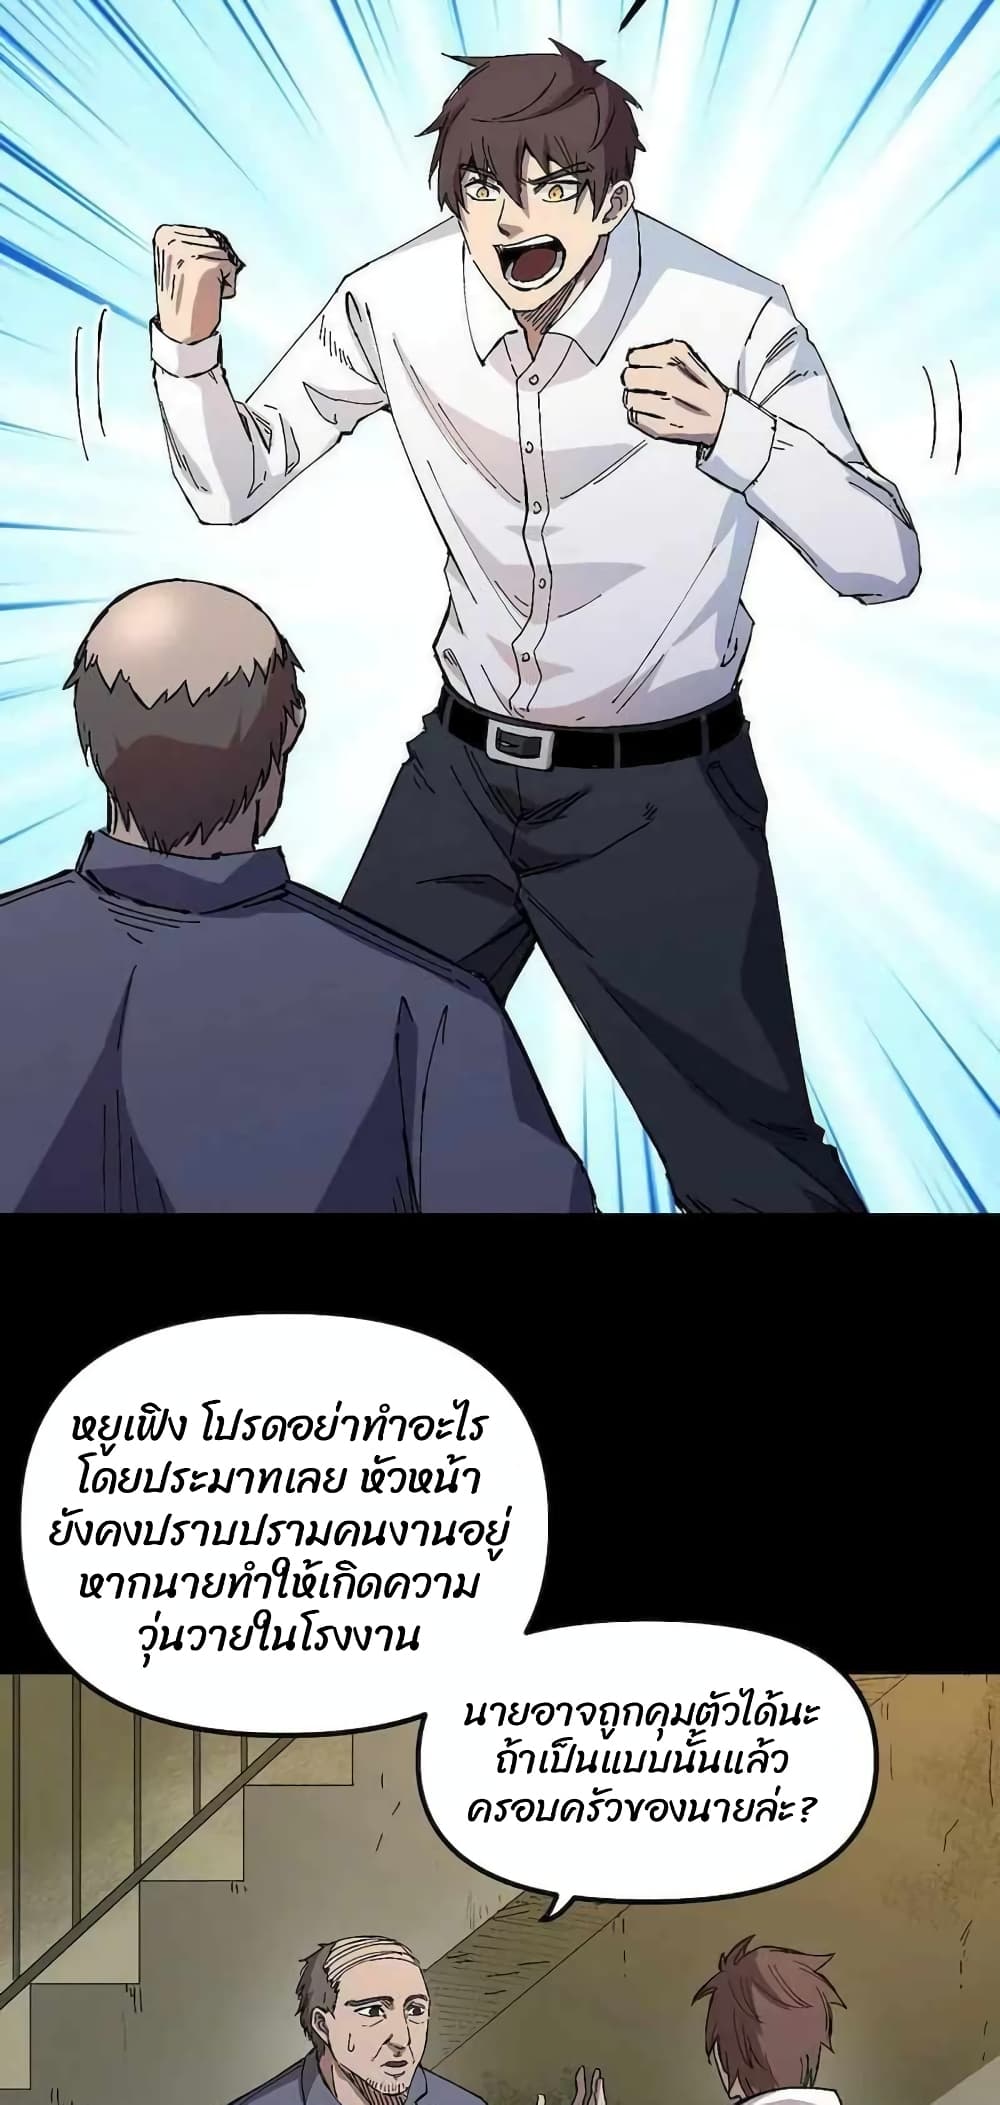 Rebirth Back to 1983 to Be a Millionaire ตอนที่ 2 (16)